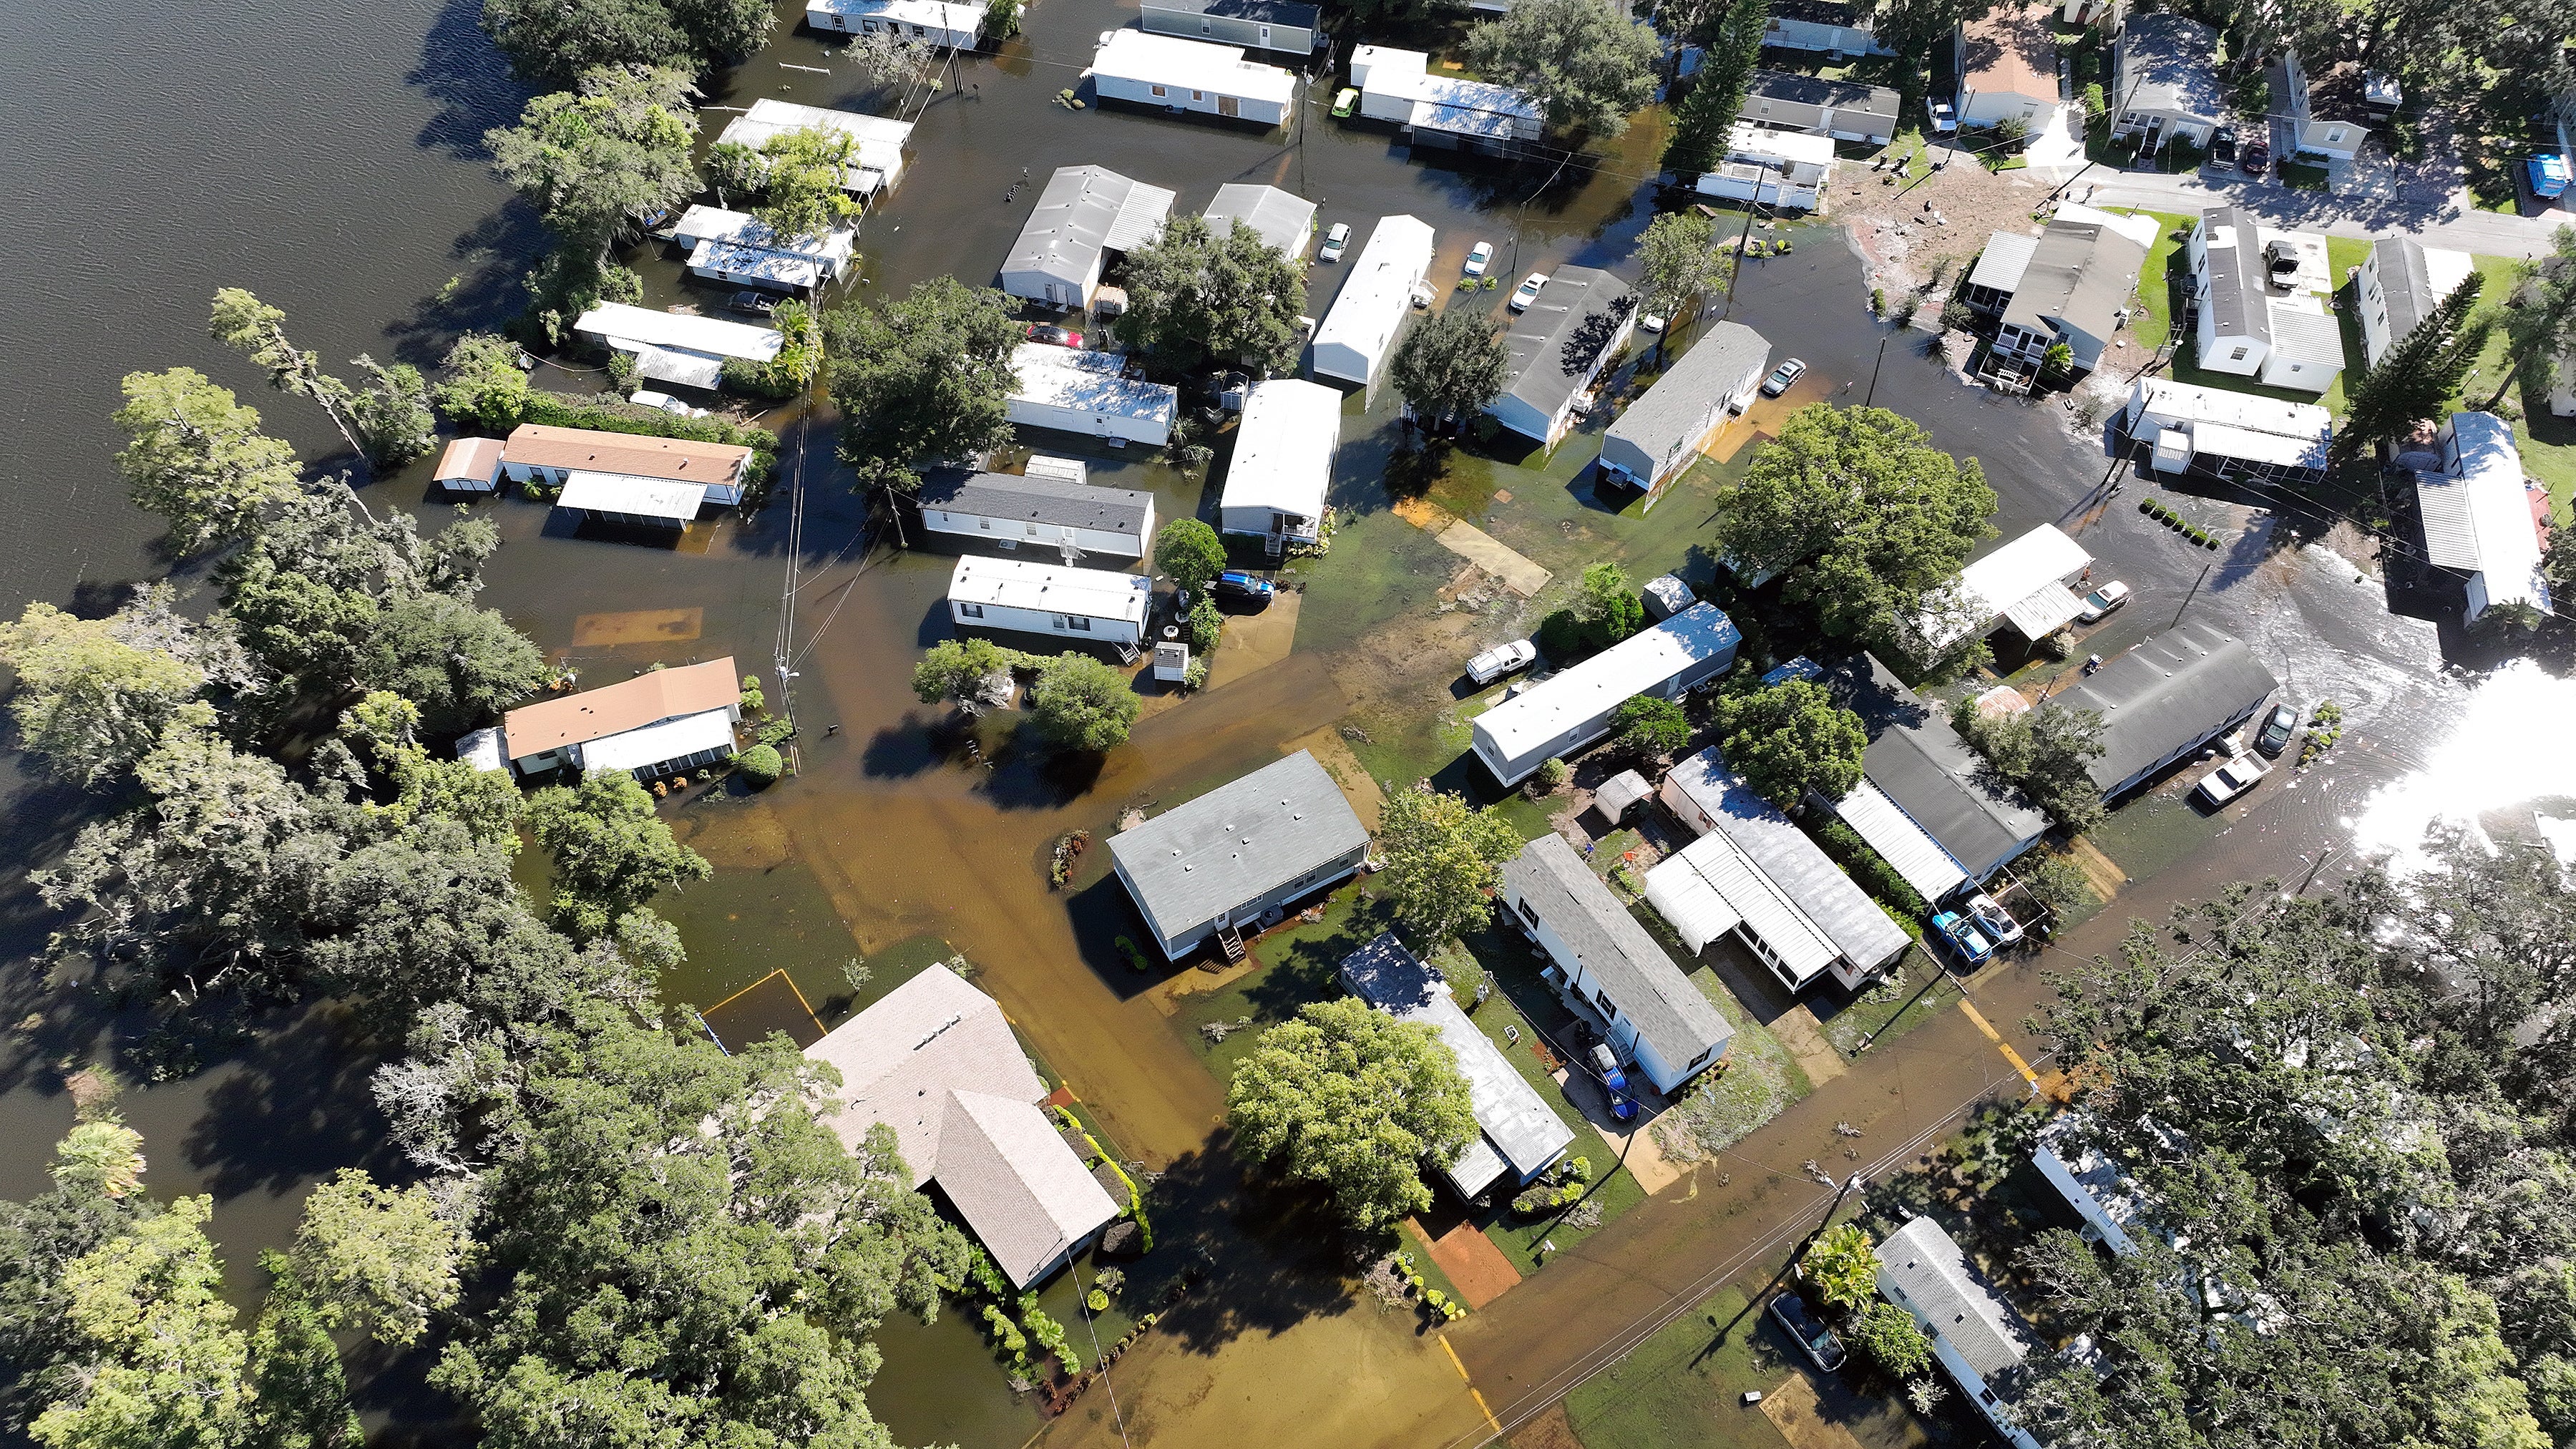 Drone footage shows a flooded neighbourhood in Orlanda, Florida on Friday